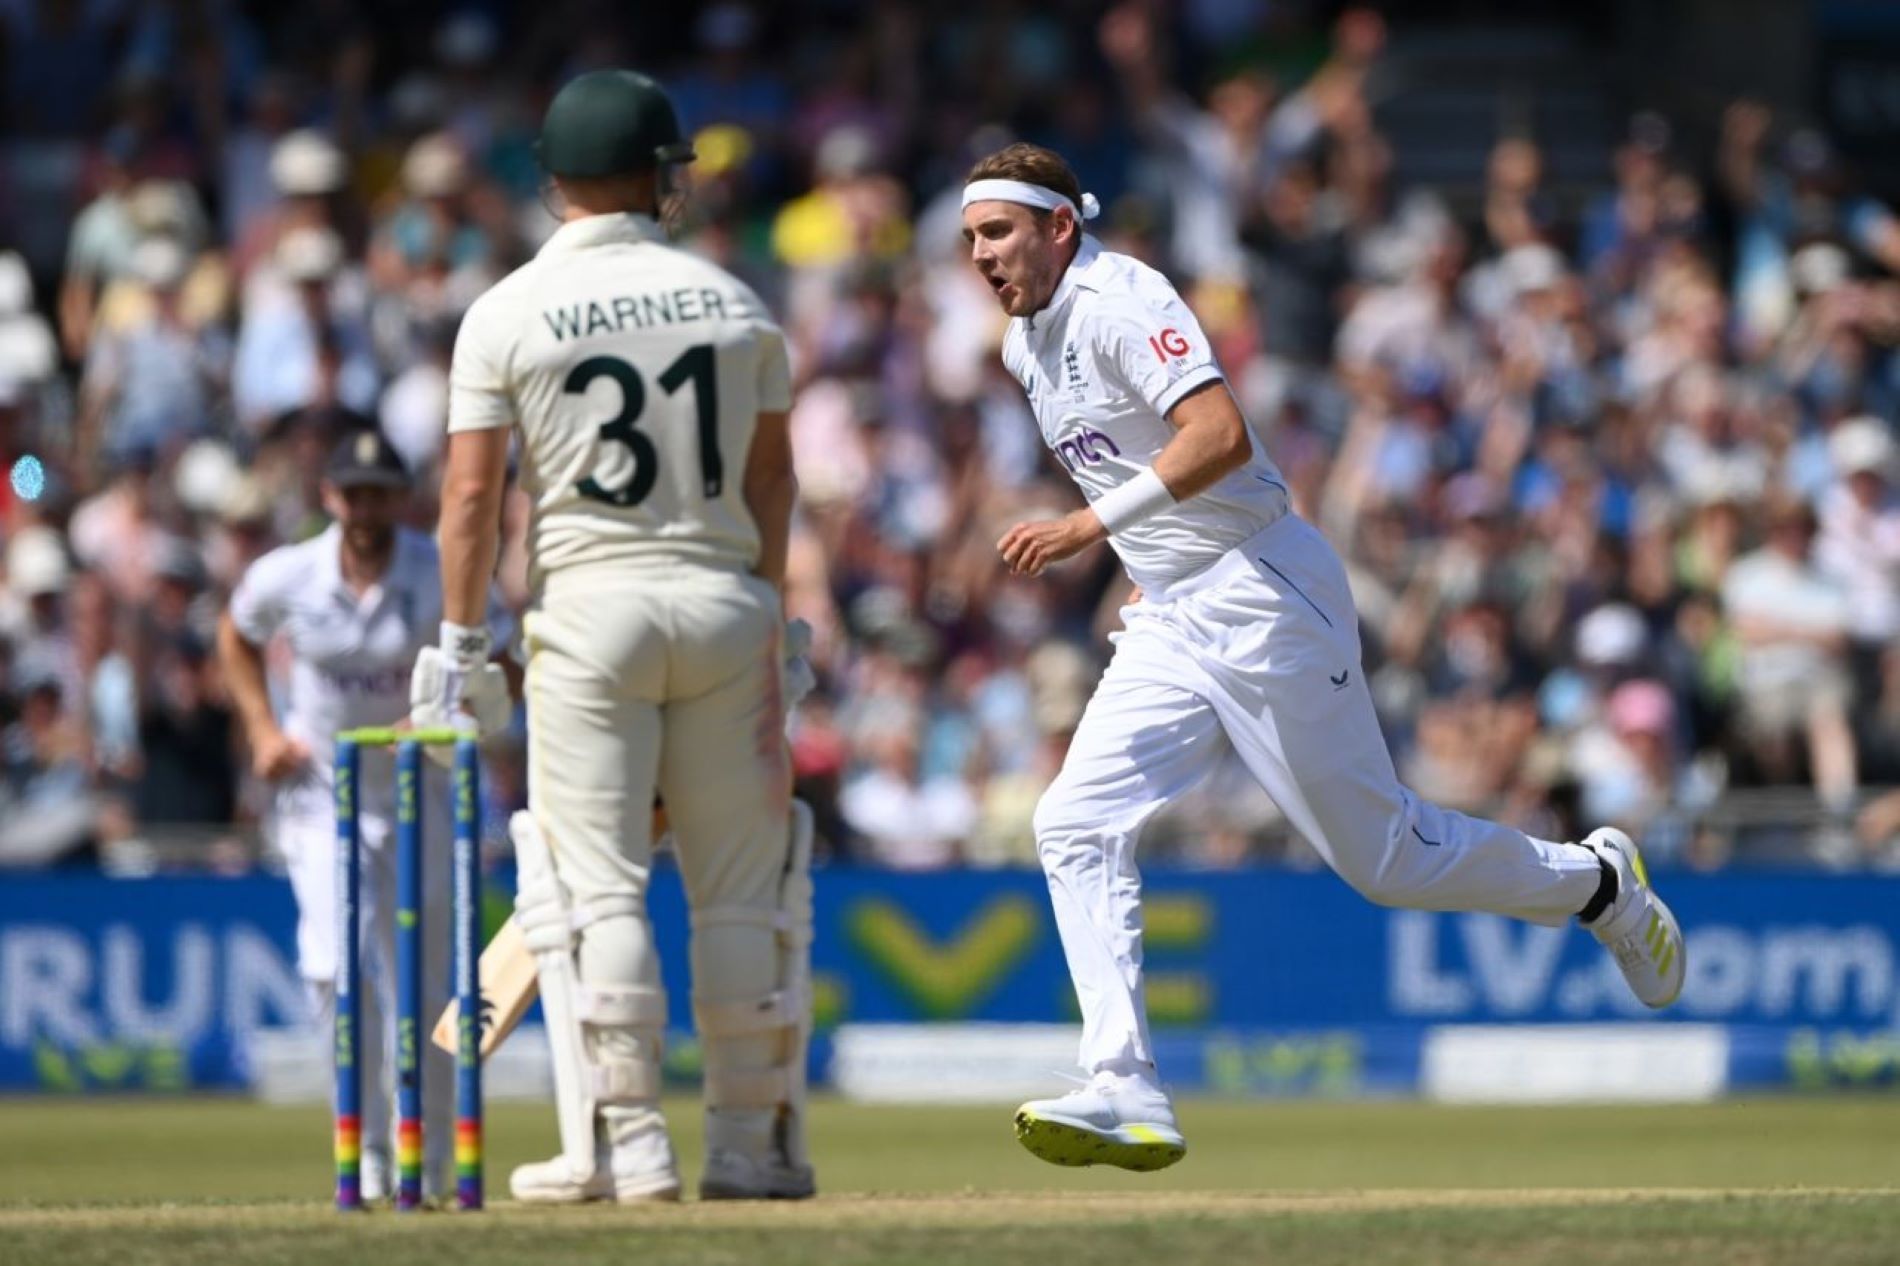 David Warner was dismissed for the 17th time in Tests by Stuart Broad.